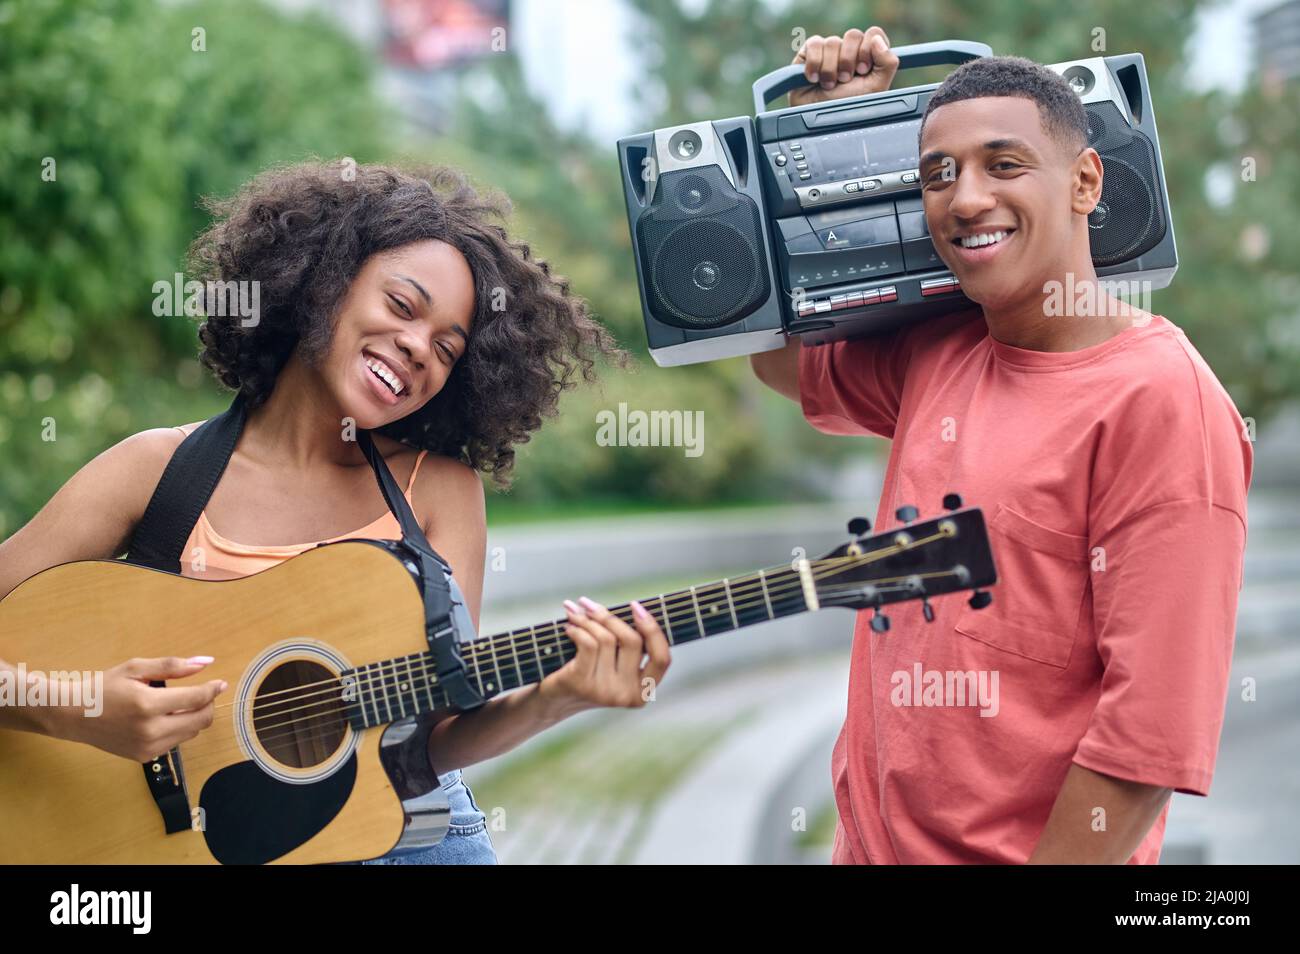 Girl with guitar and guy smiling at camera Stock Photo